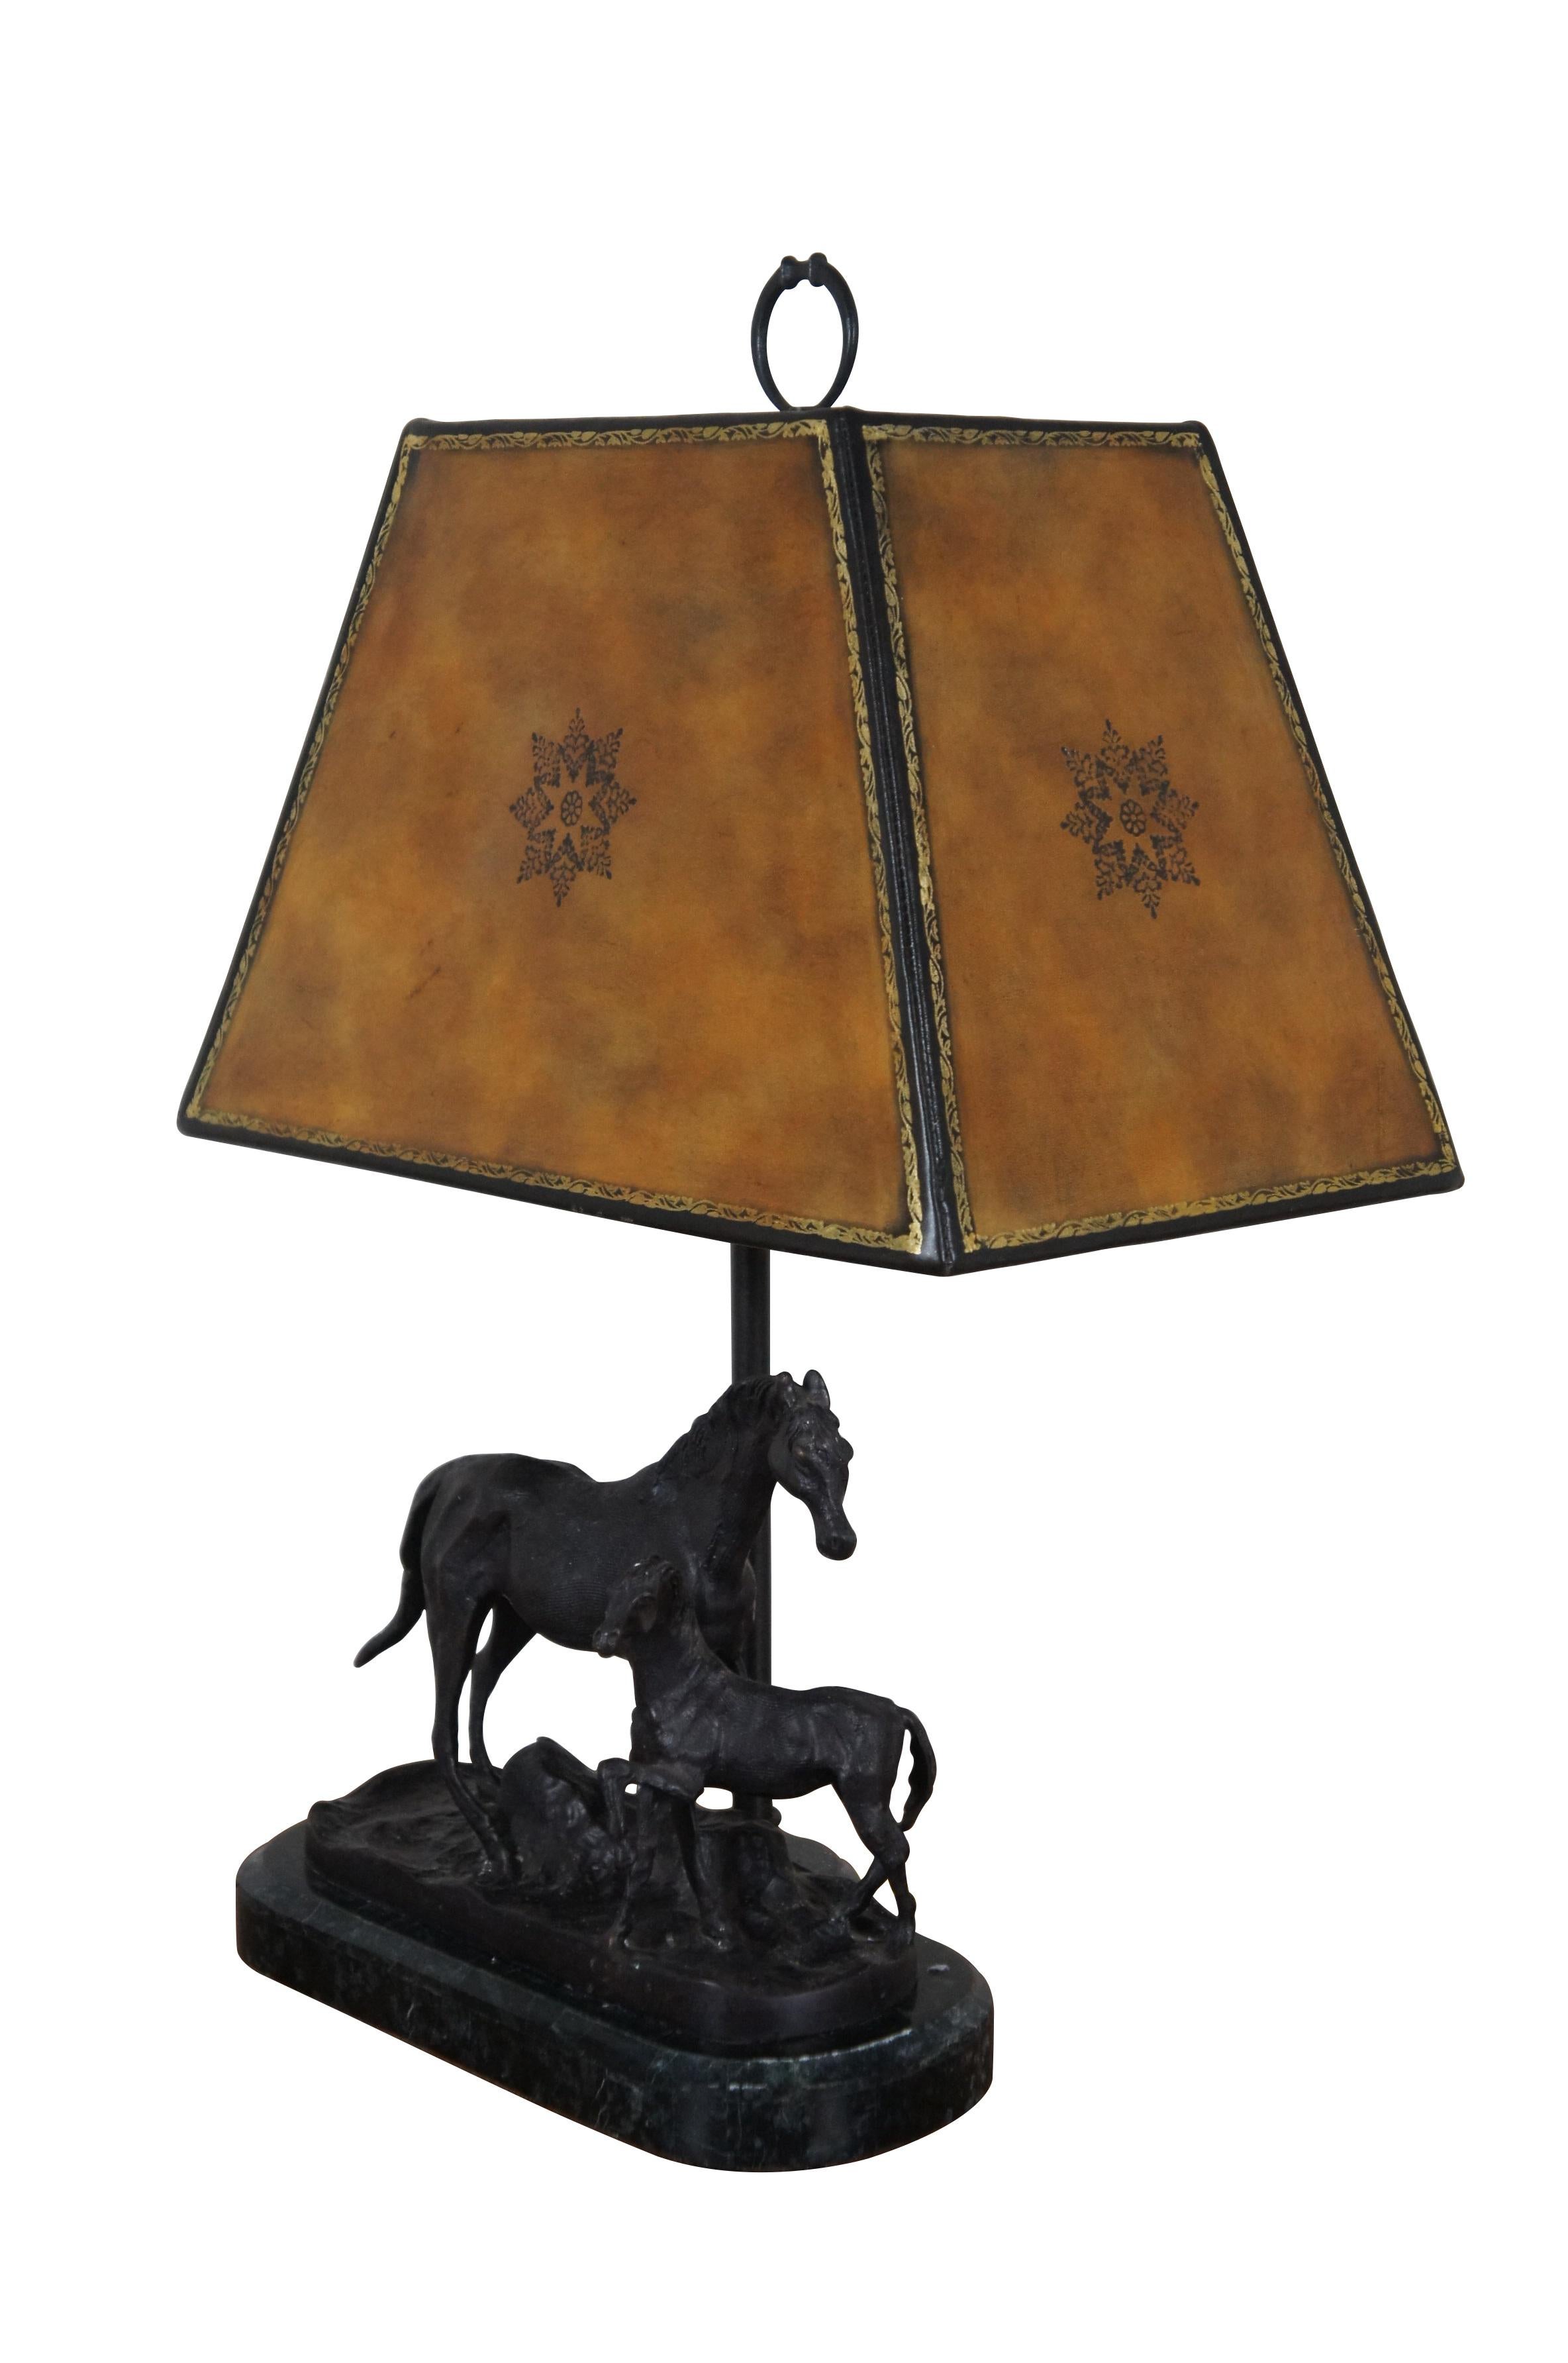 Late 20th century figural horse bronze table lamp by Maitland Smith featuring a mare and foal in tableau on a charcoal black marble clad base. Includes hard and rectangular tooled / gilded leather shade with foiled interior. Horse bit shaped finial.